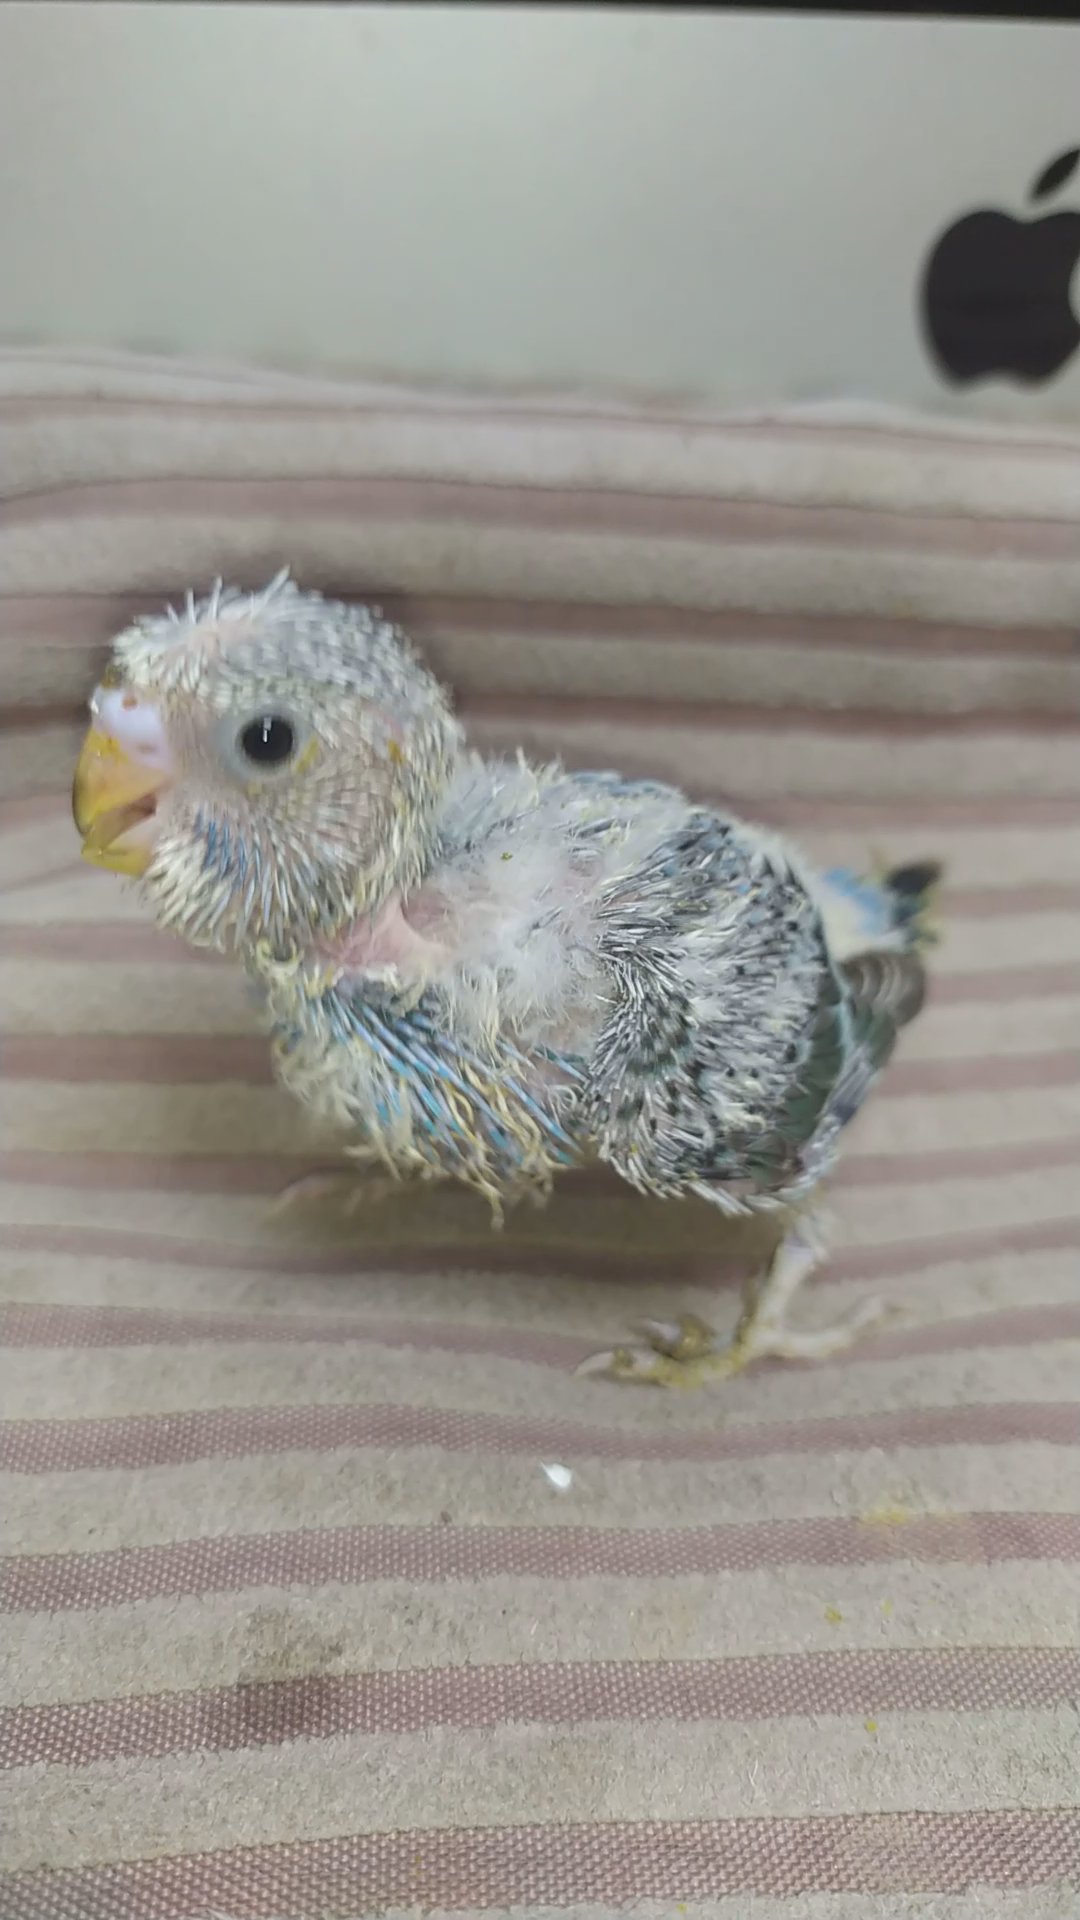 Crested budgie chicks in Sharjah